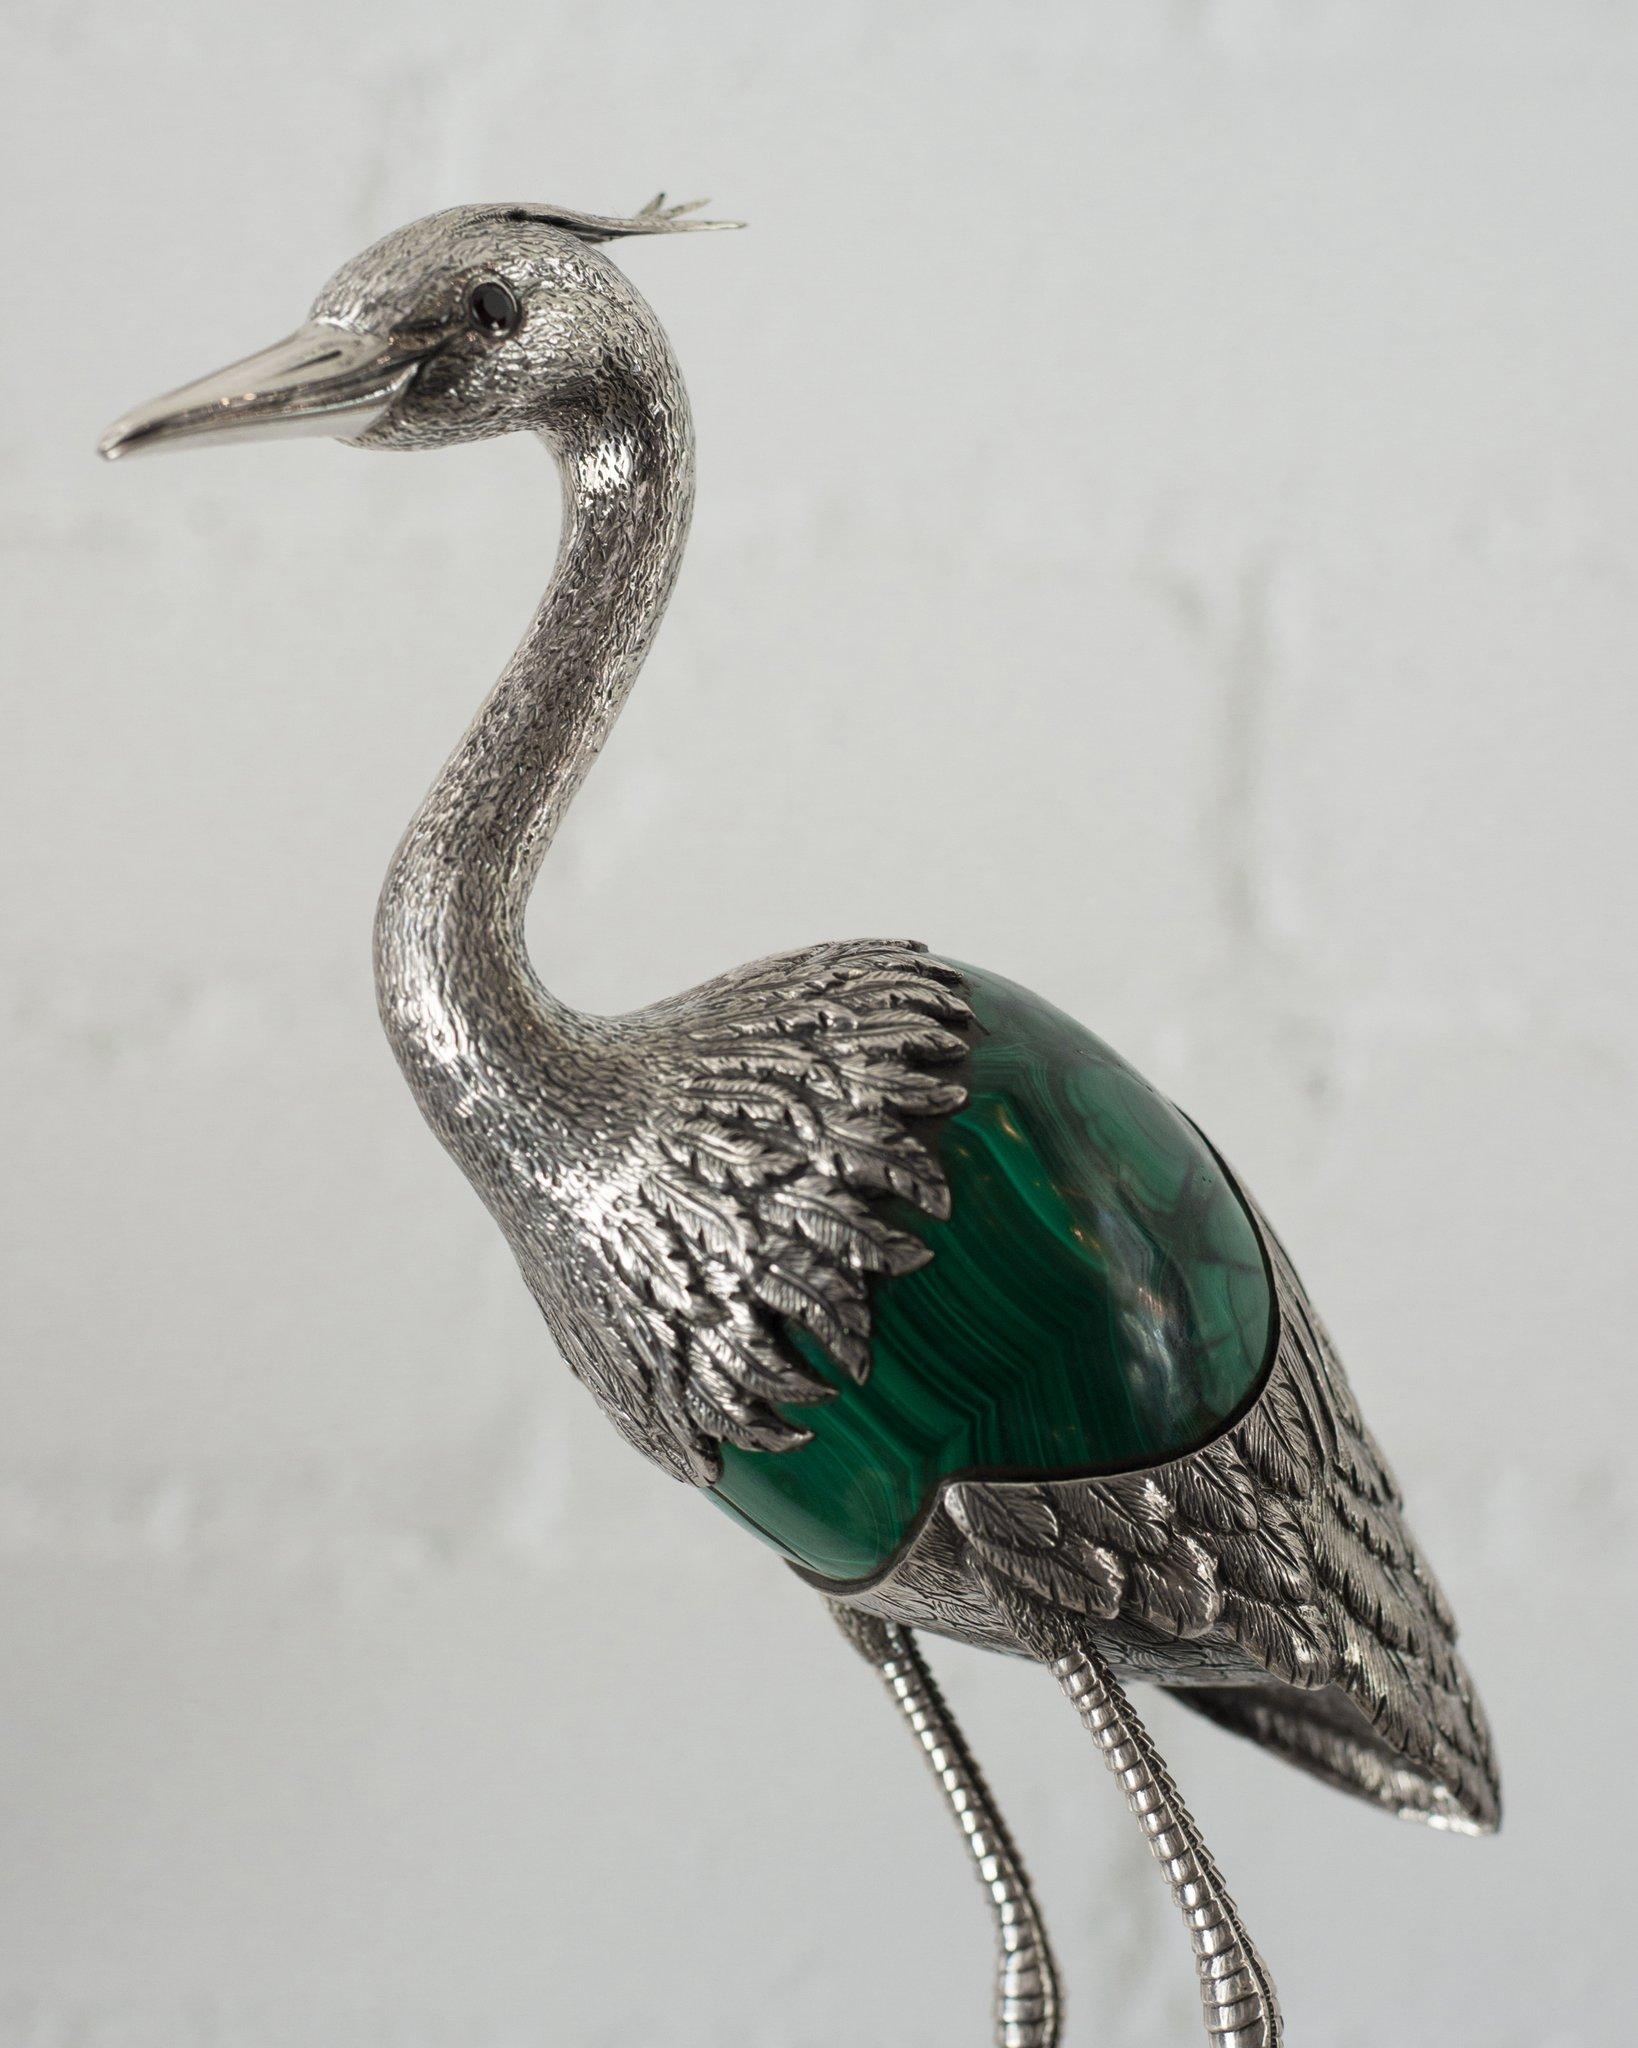 Portuguese Sterling Silver 925 Heron Sculpture with Green Malachite Stone Egg